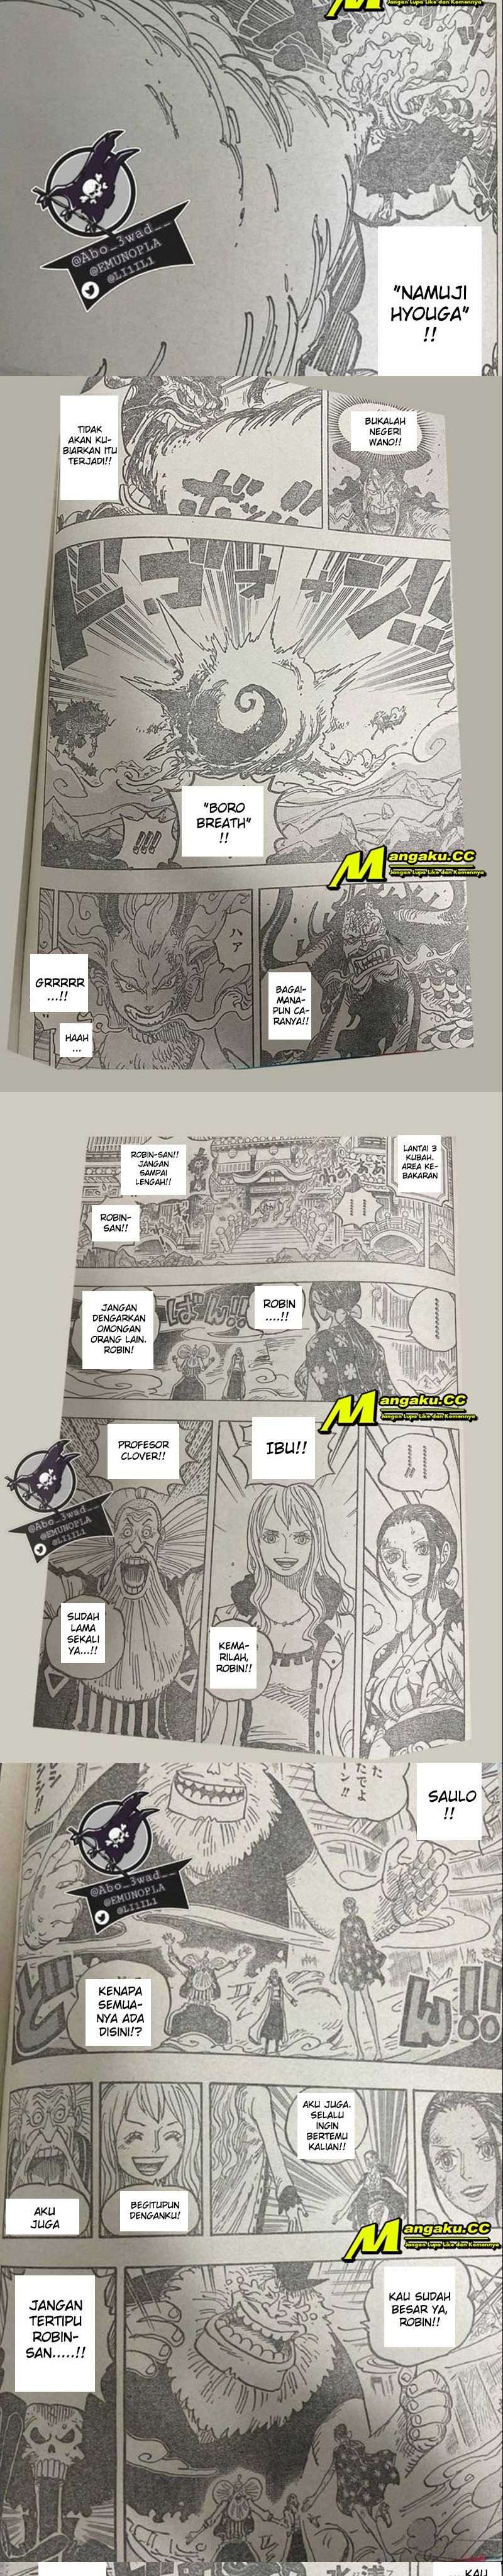 One Piece Chapter 1020 Lq - 39